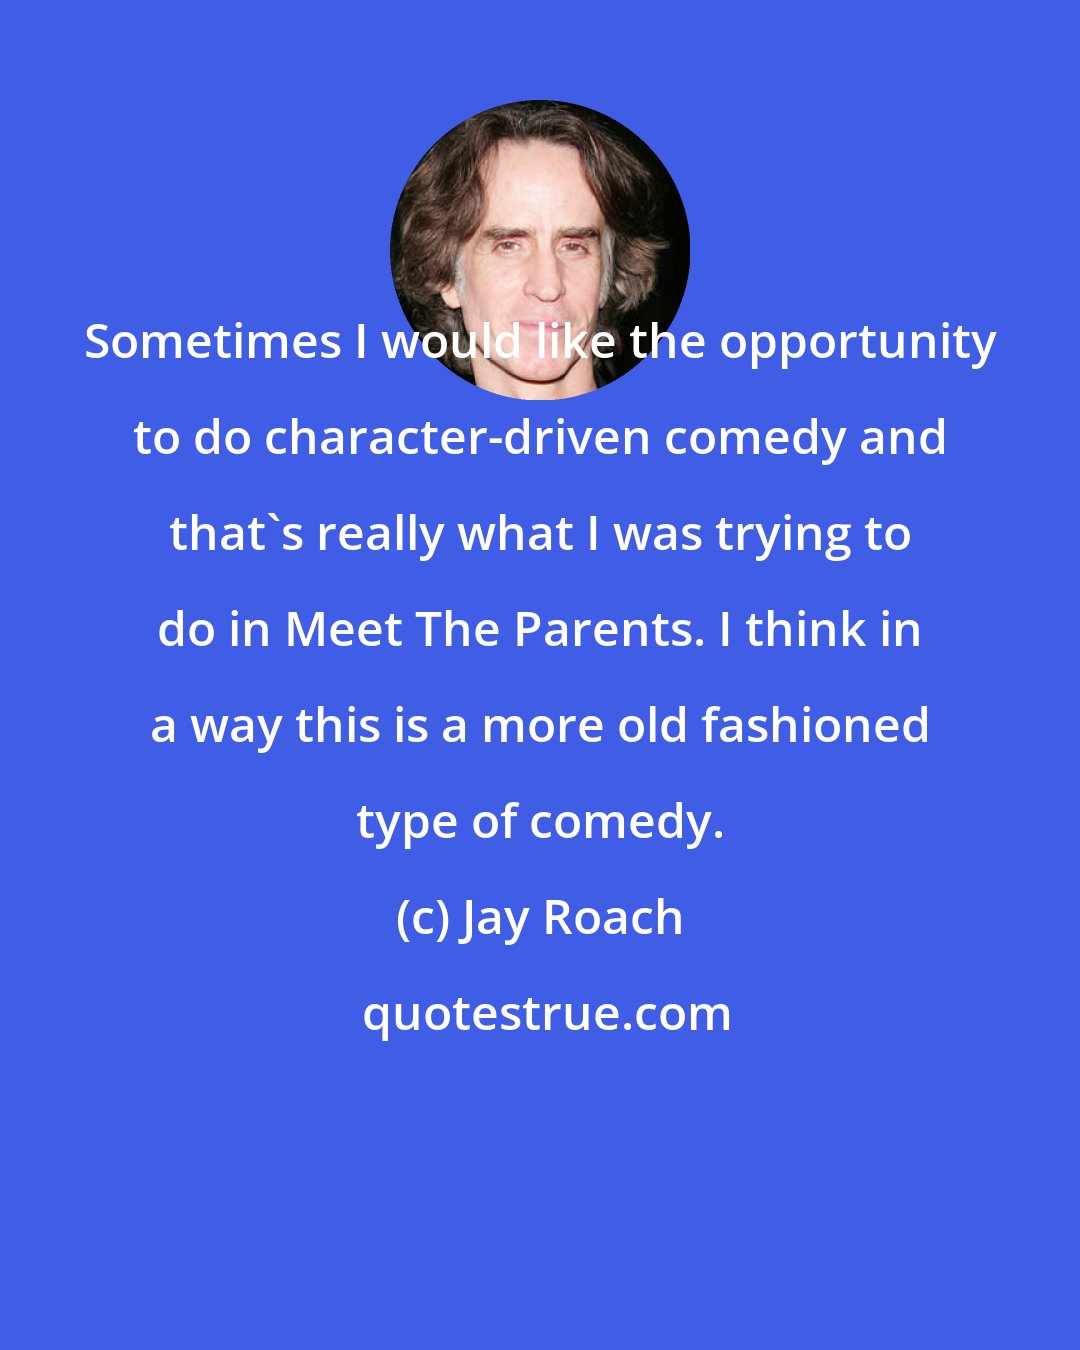 Jay Roach: Sometimes I would like the opportunity to do character-driven comedy and that's really what I was trying to do in Meet The Parents. I think in a way this is a more old fashioned type of comedy.